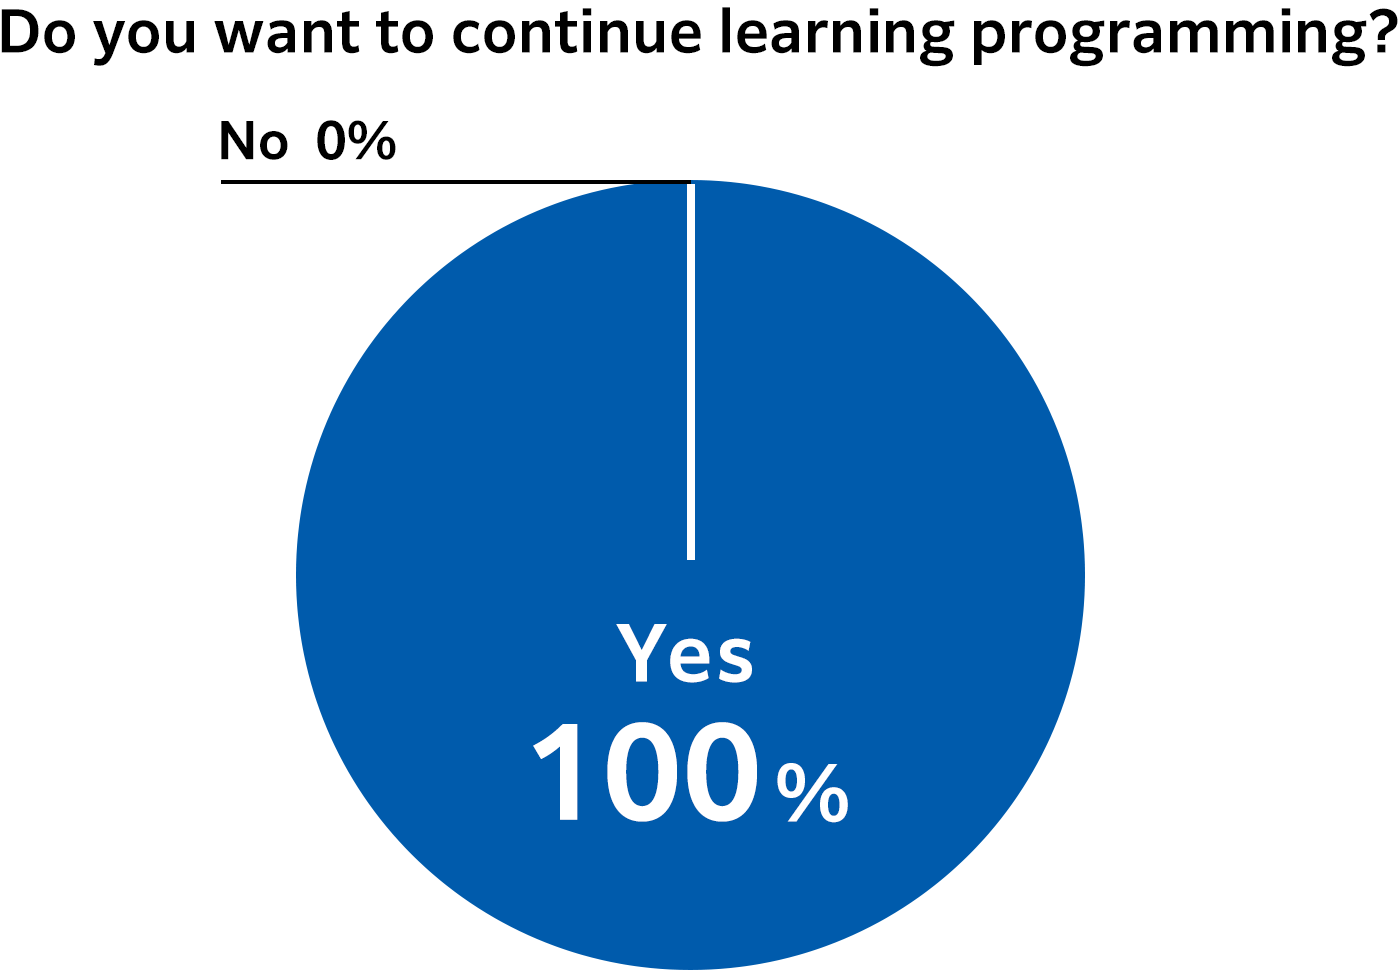 Do you want to continue learning programming? Yes100%